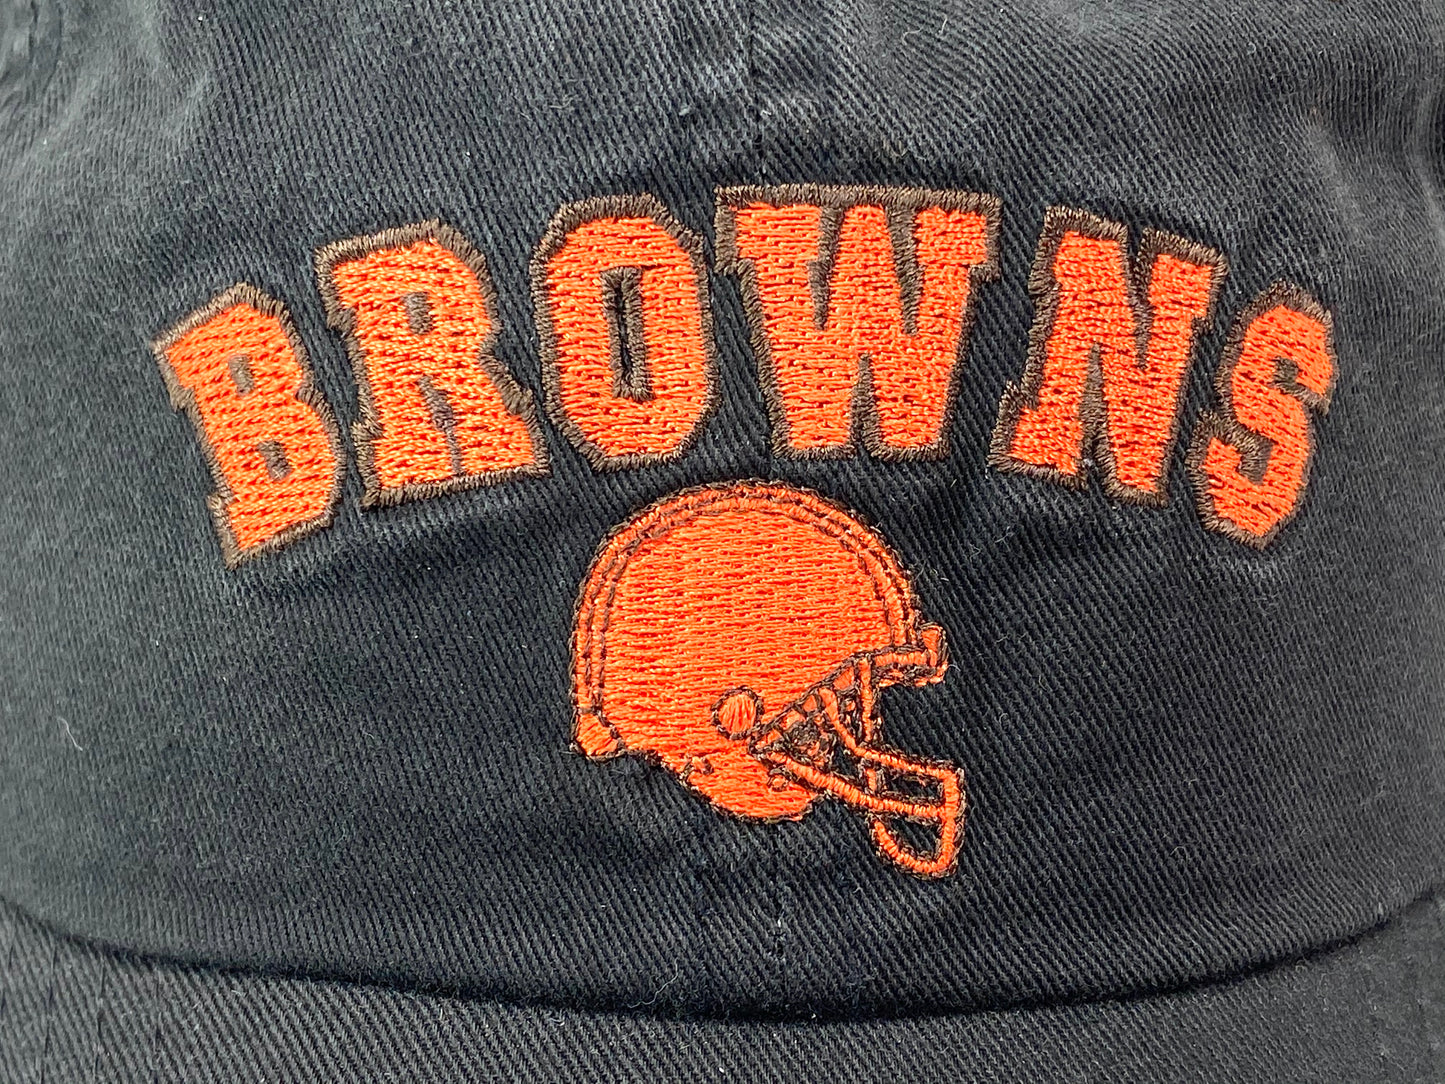 Cleveland Browns Vintage NFL Unstructured Black Logo Cap by American Needle